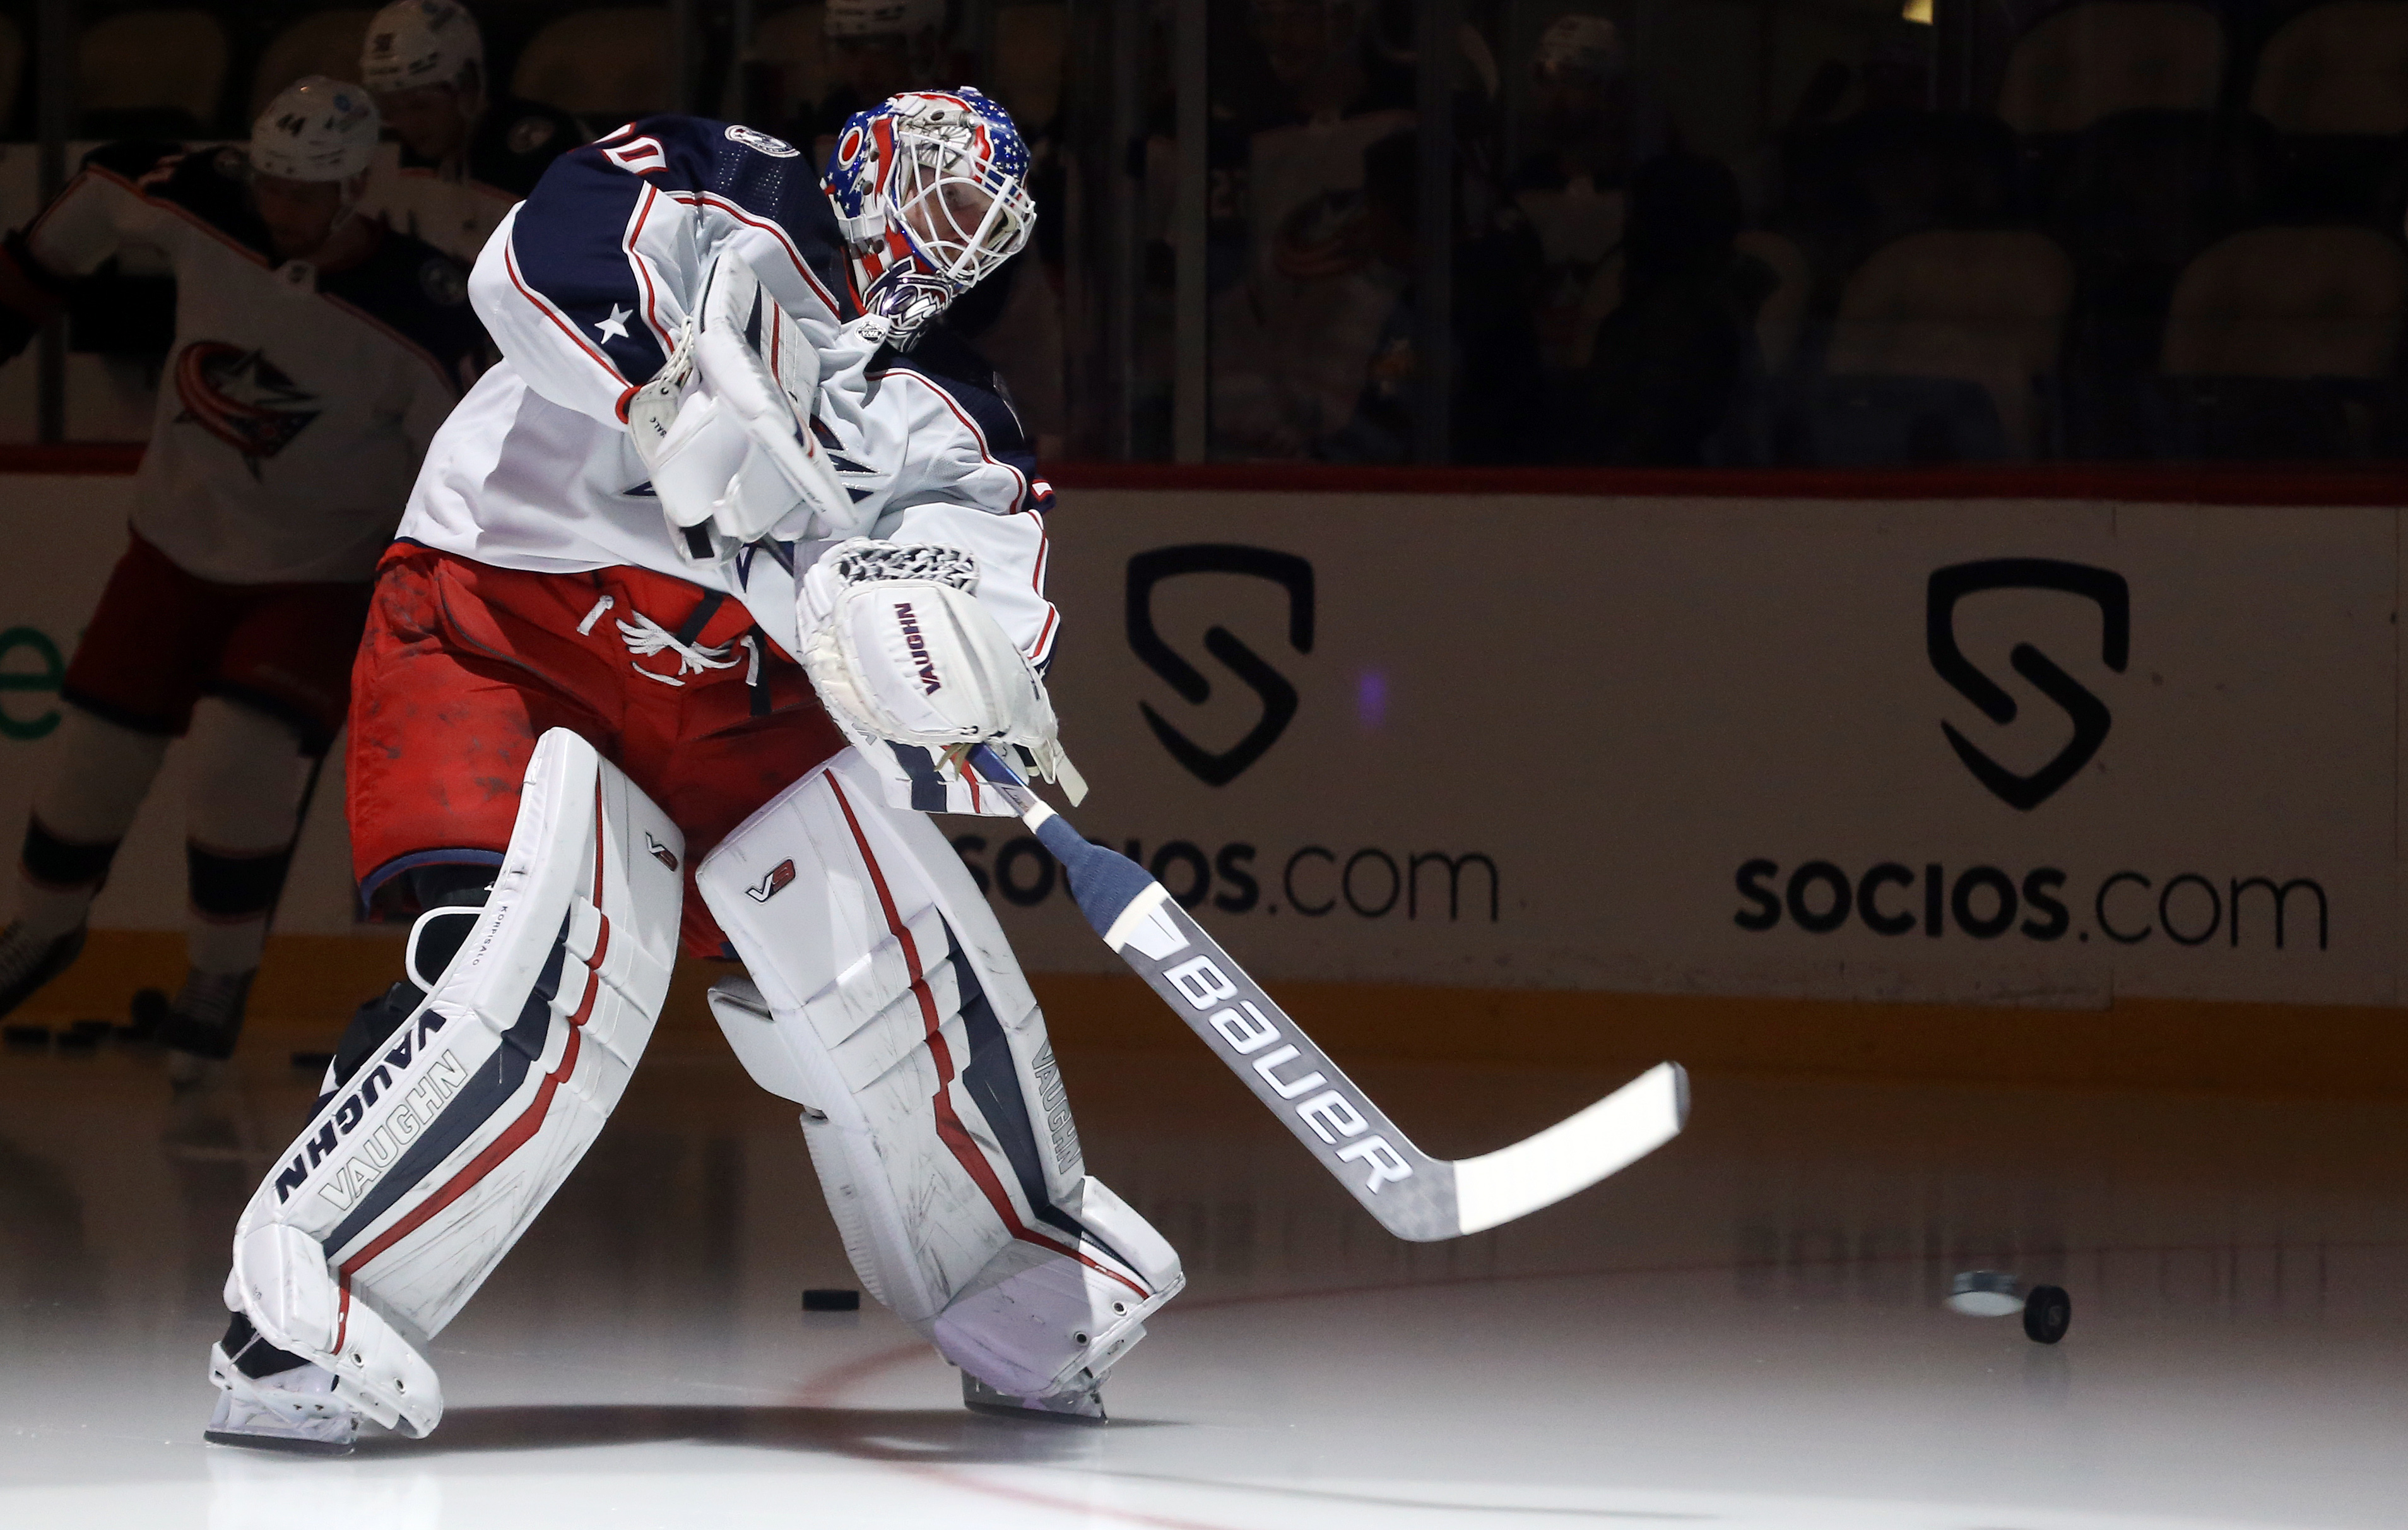 Memorial service to be held for Blue Jackets goalie